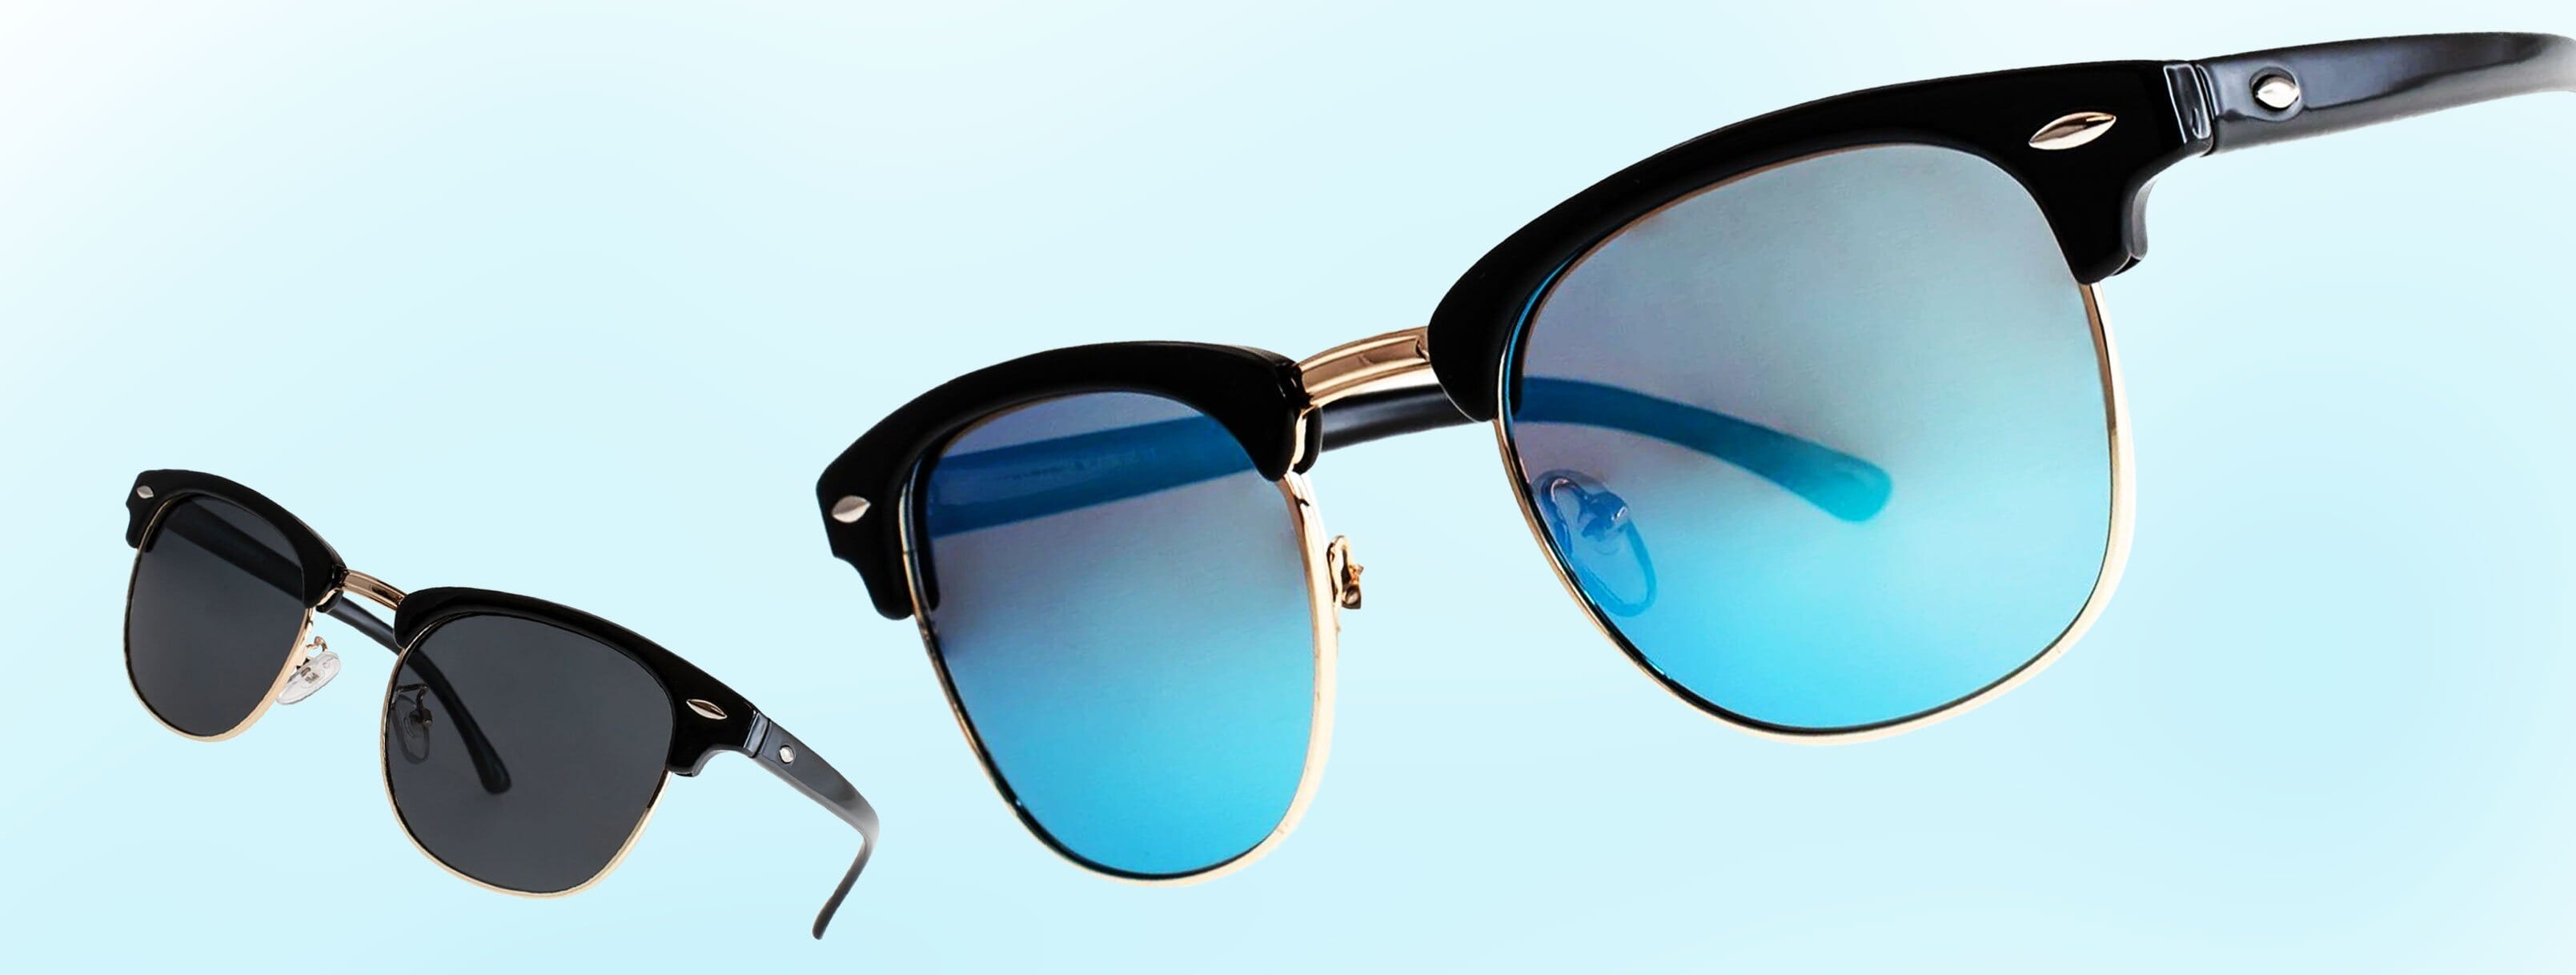 THE BEST TYPES OF SUNGLASSES ONE SHOULD HAVE